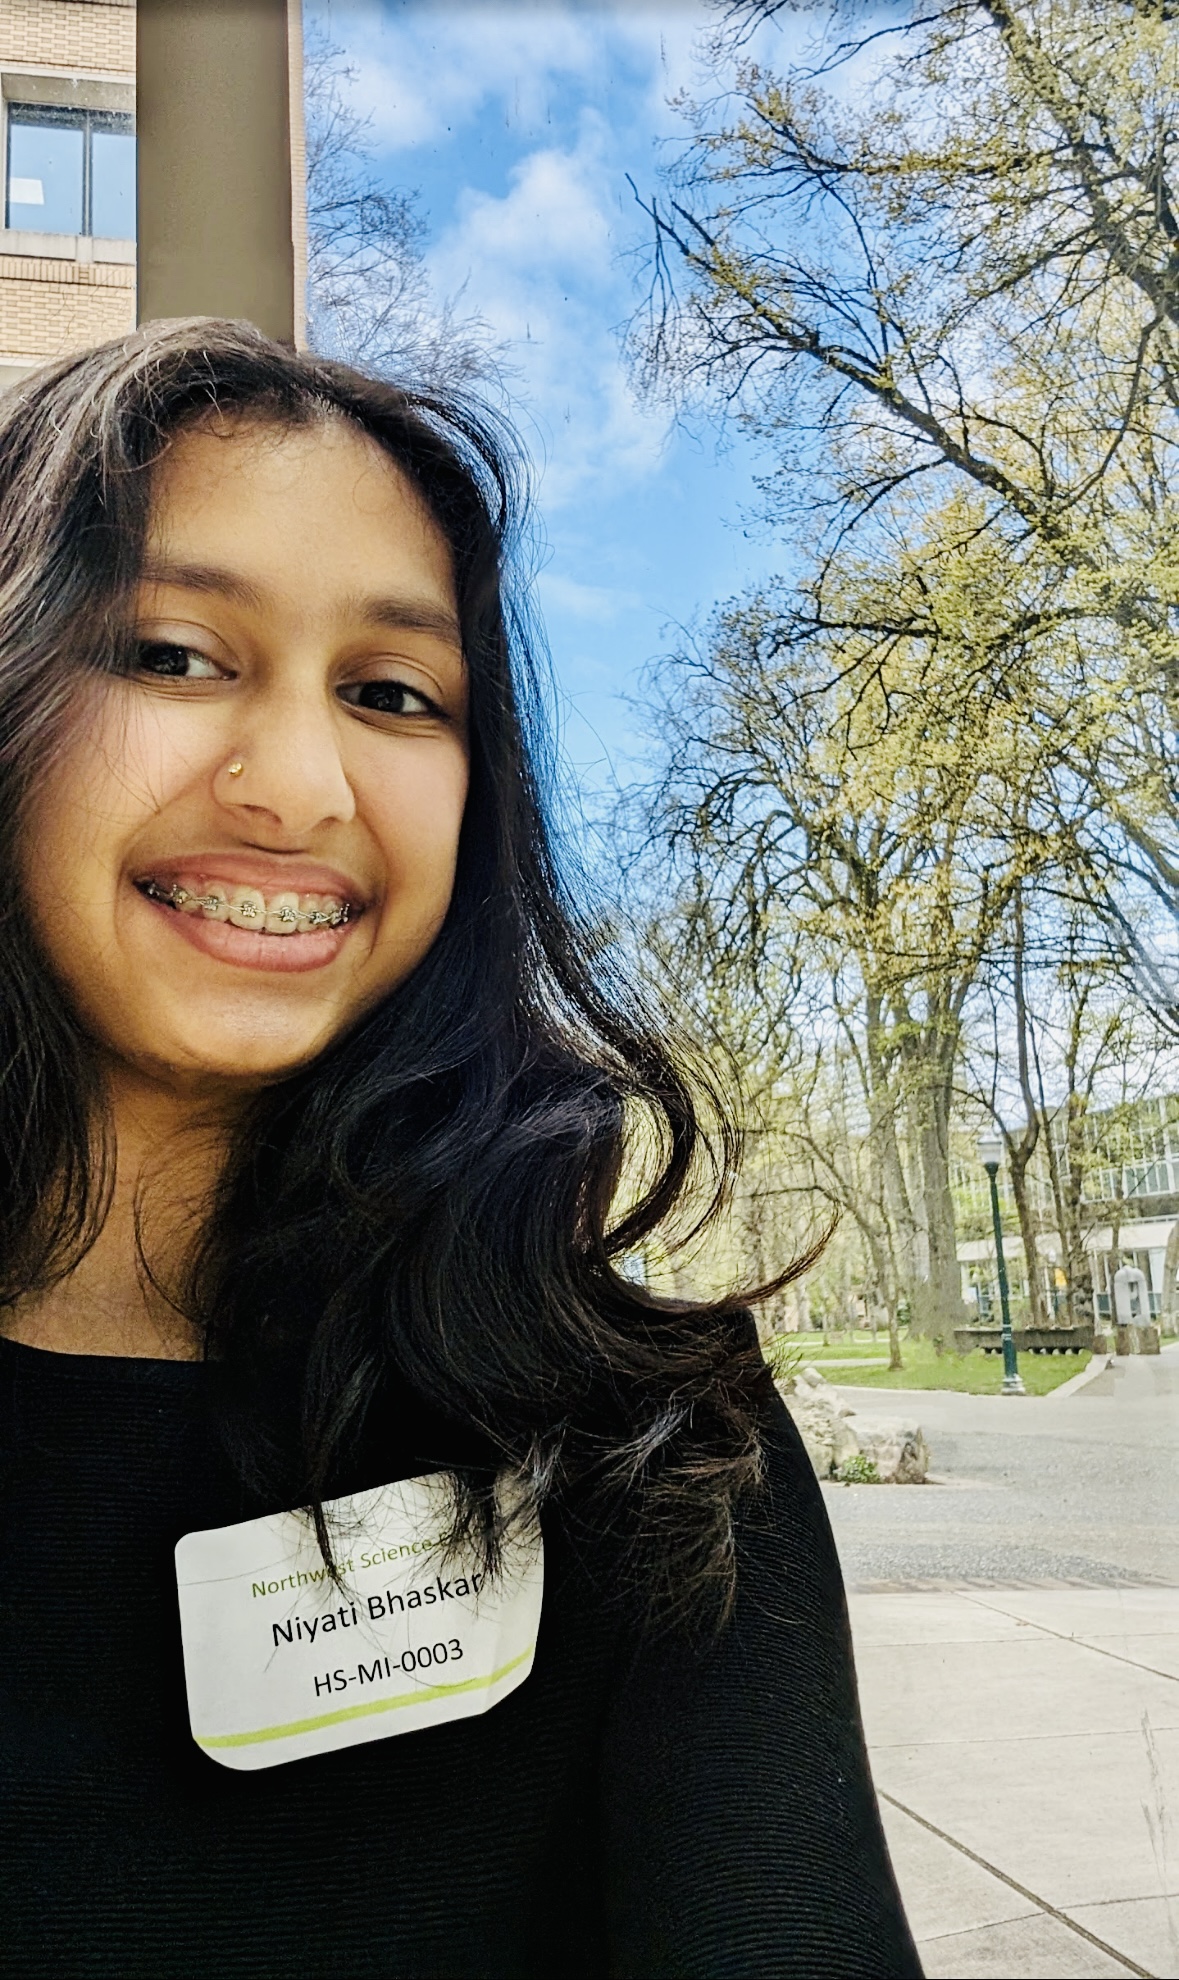 Freshman, Niyeti Bhaskar poses outside an ISEF convention. Intellectually brilliant, Bhaskar not only excelled in the local science competitions, but is headed to State with her presentation in microbiology. Photo provided by Niyati Bhaskar.